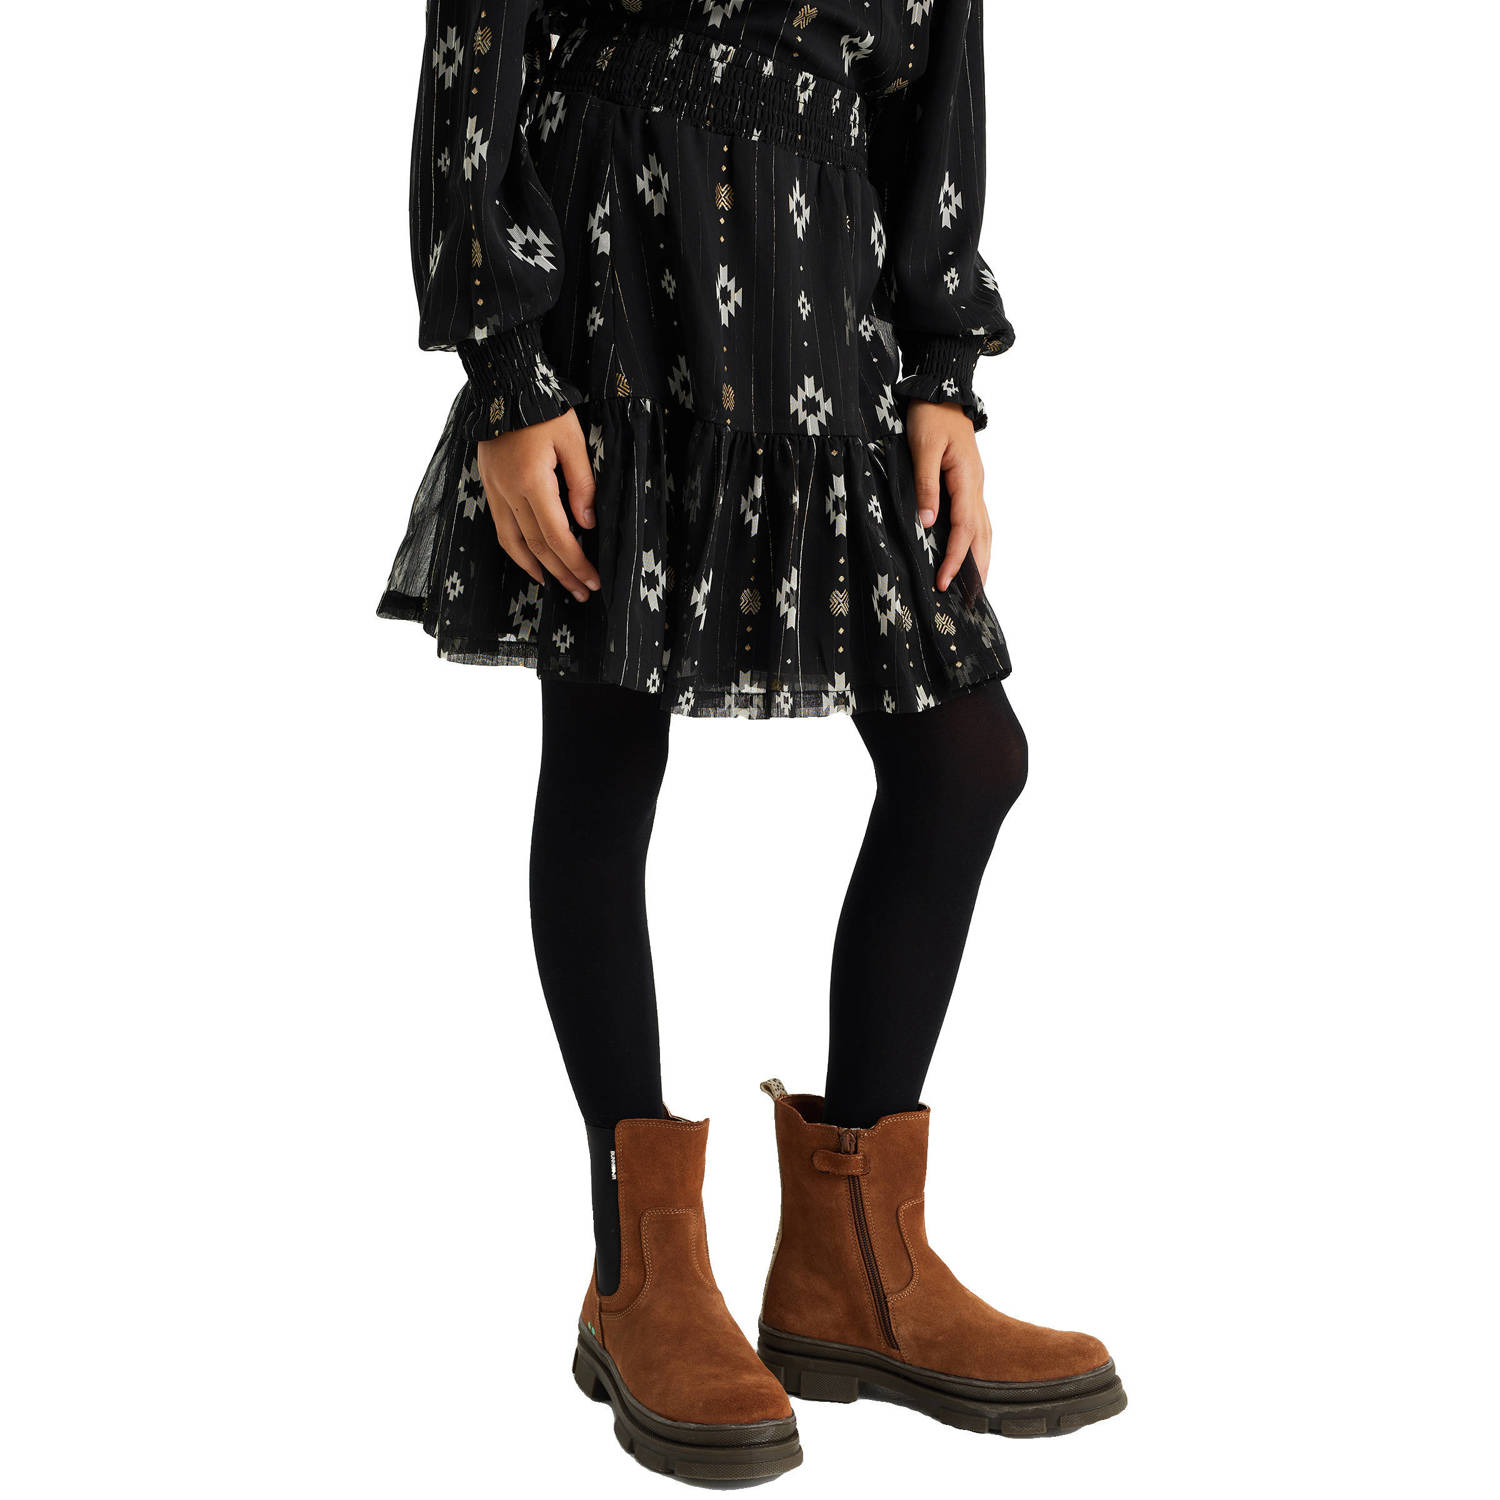 WE Fashion rok met all over print zwart Meisjes Polyester All over print 110 116